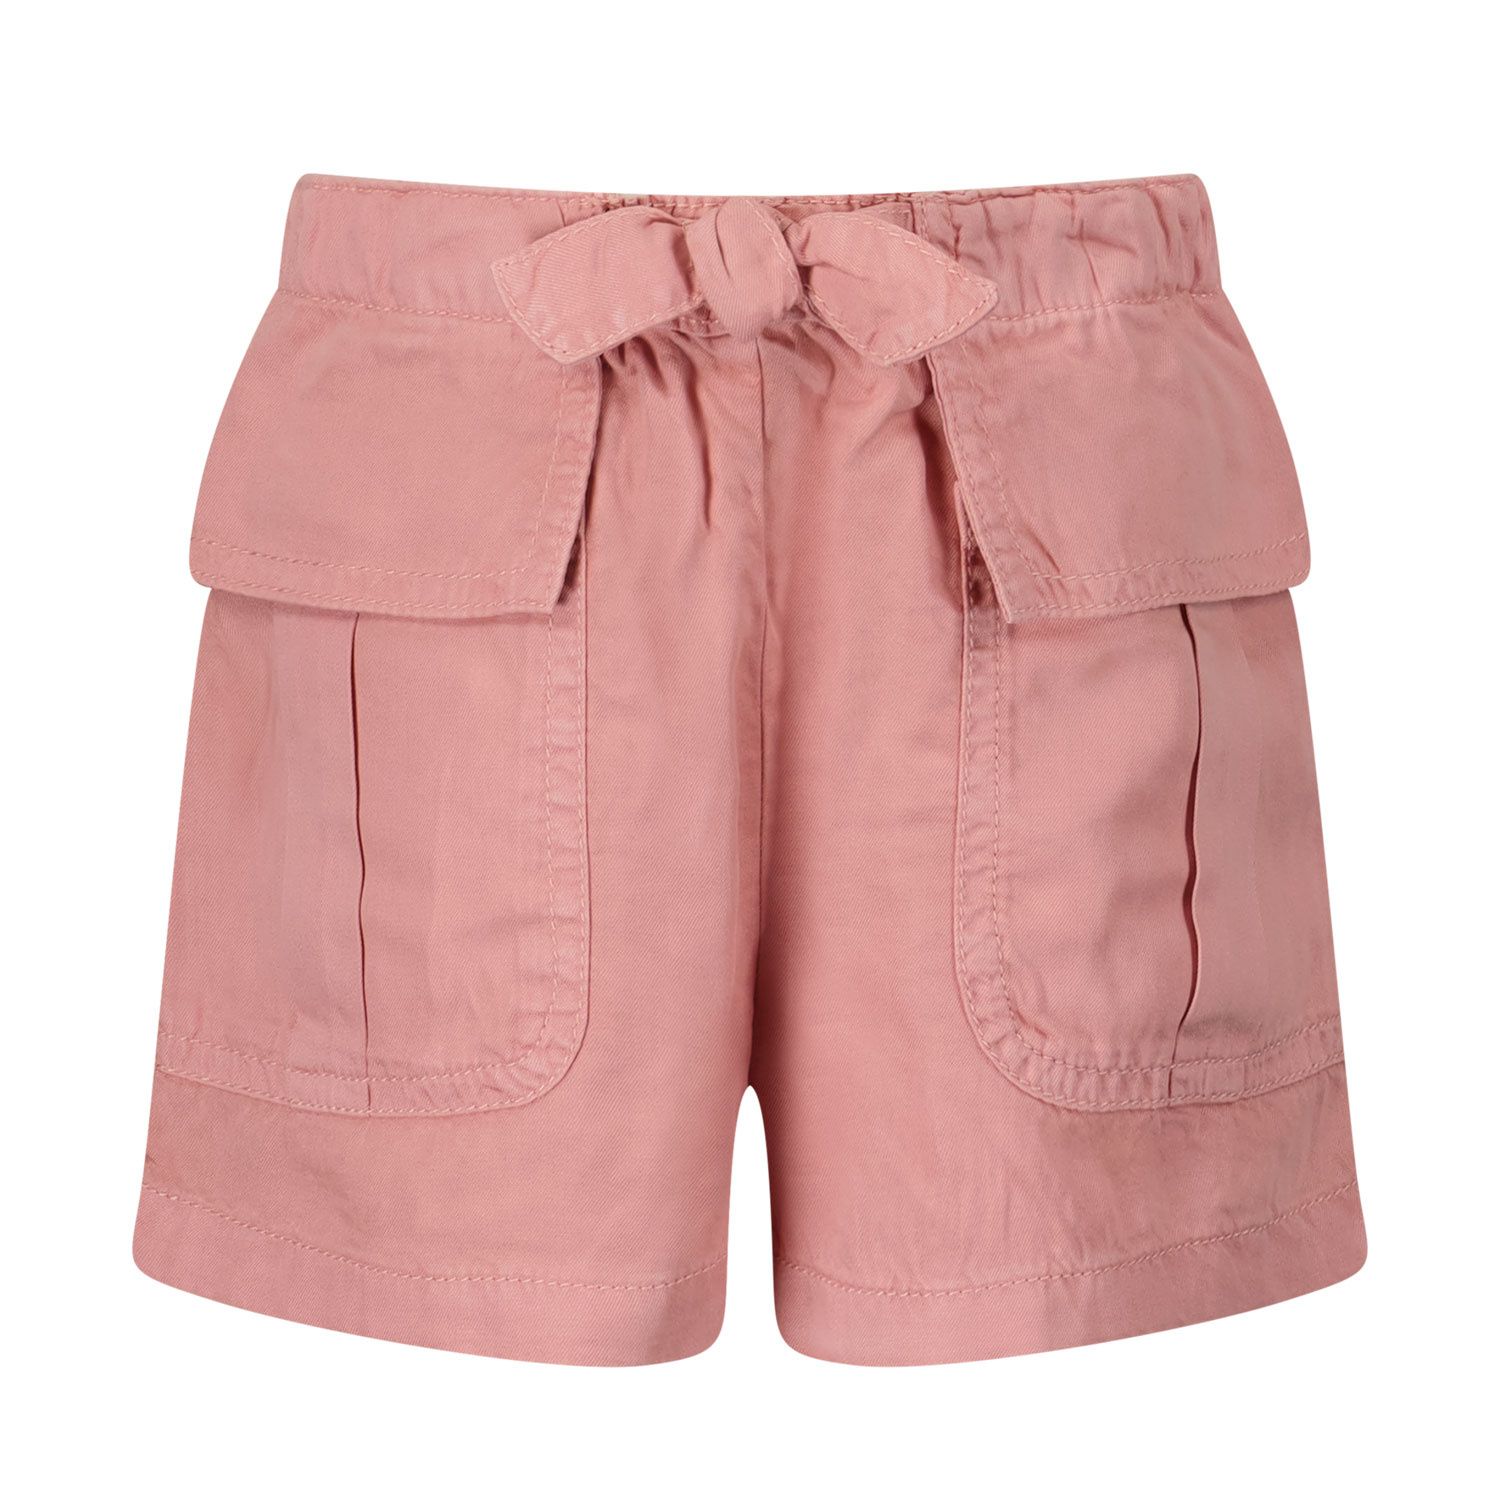 Picture of Mayoral 3274 kids shorts light pink